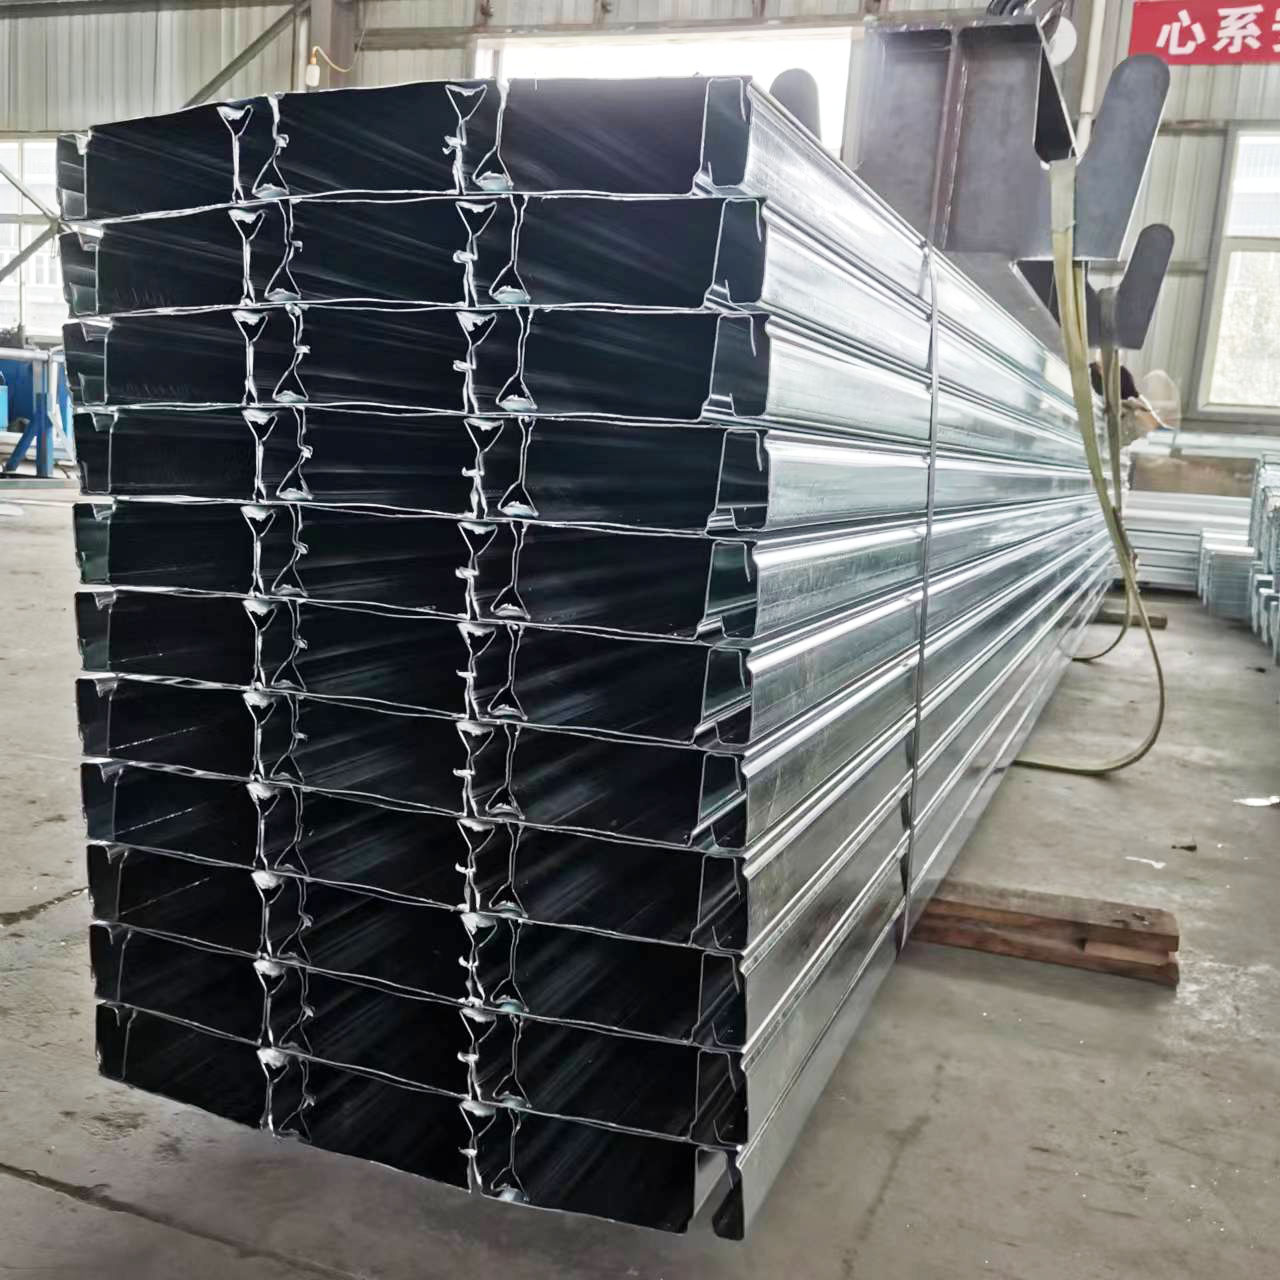 YX65-170-510 bearing Plate of closed floor from China